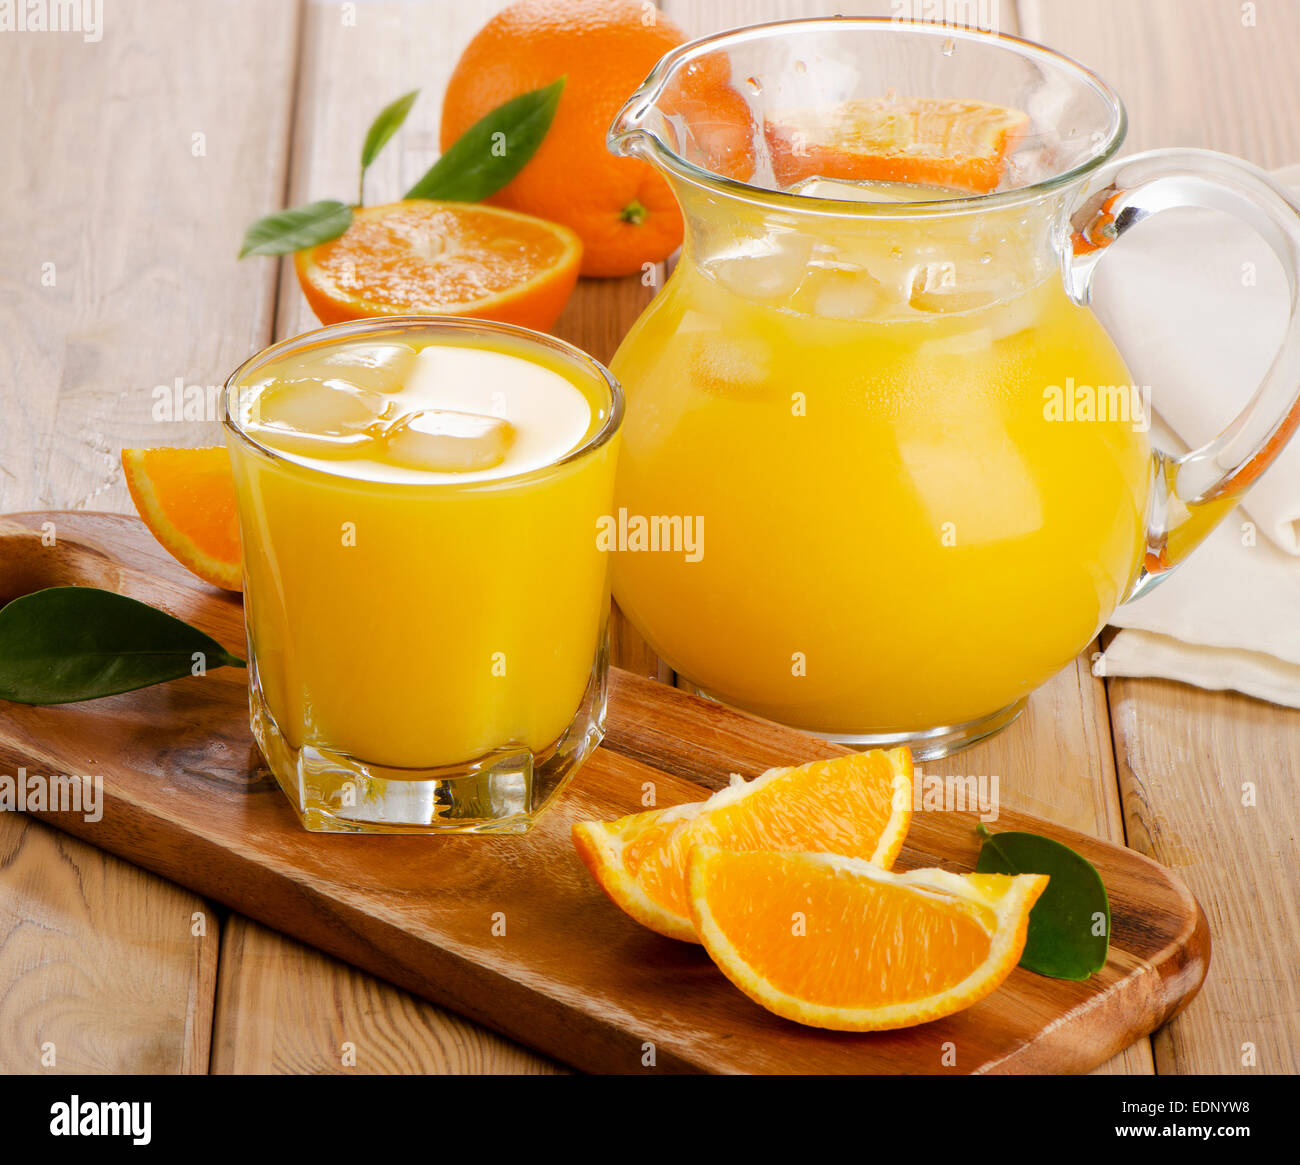 Fresh Orange Juice In Jug Stock Photo, Picture and Royalty Free Image.  Image 36913535.